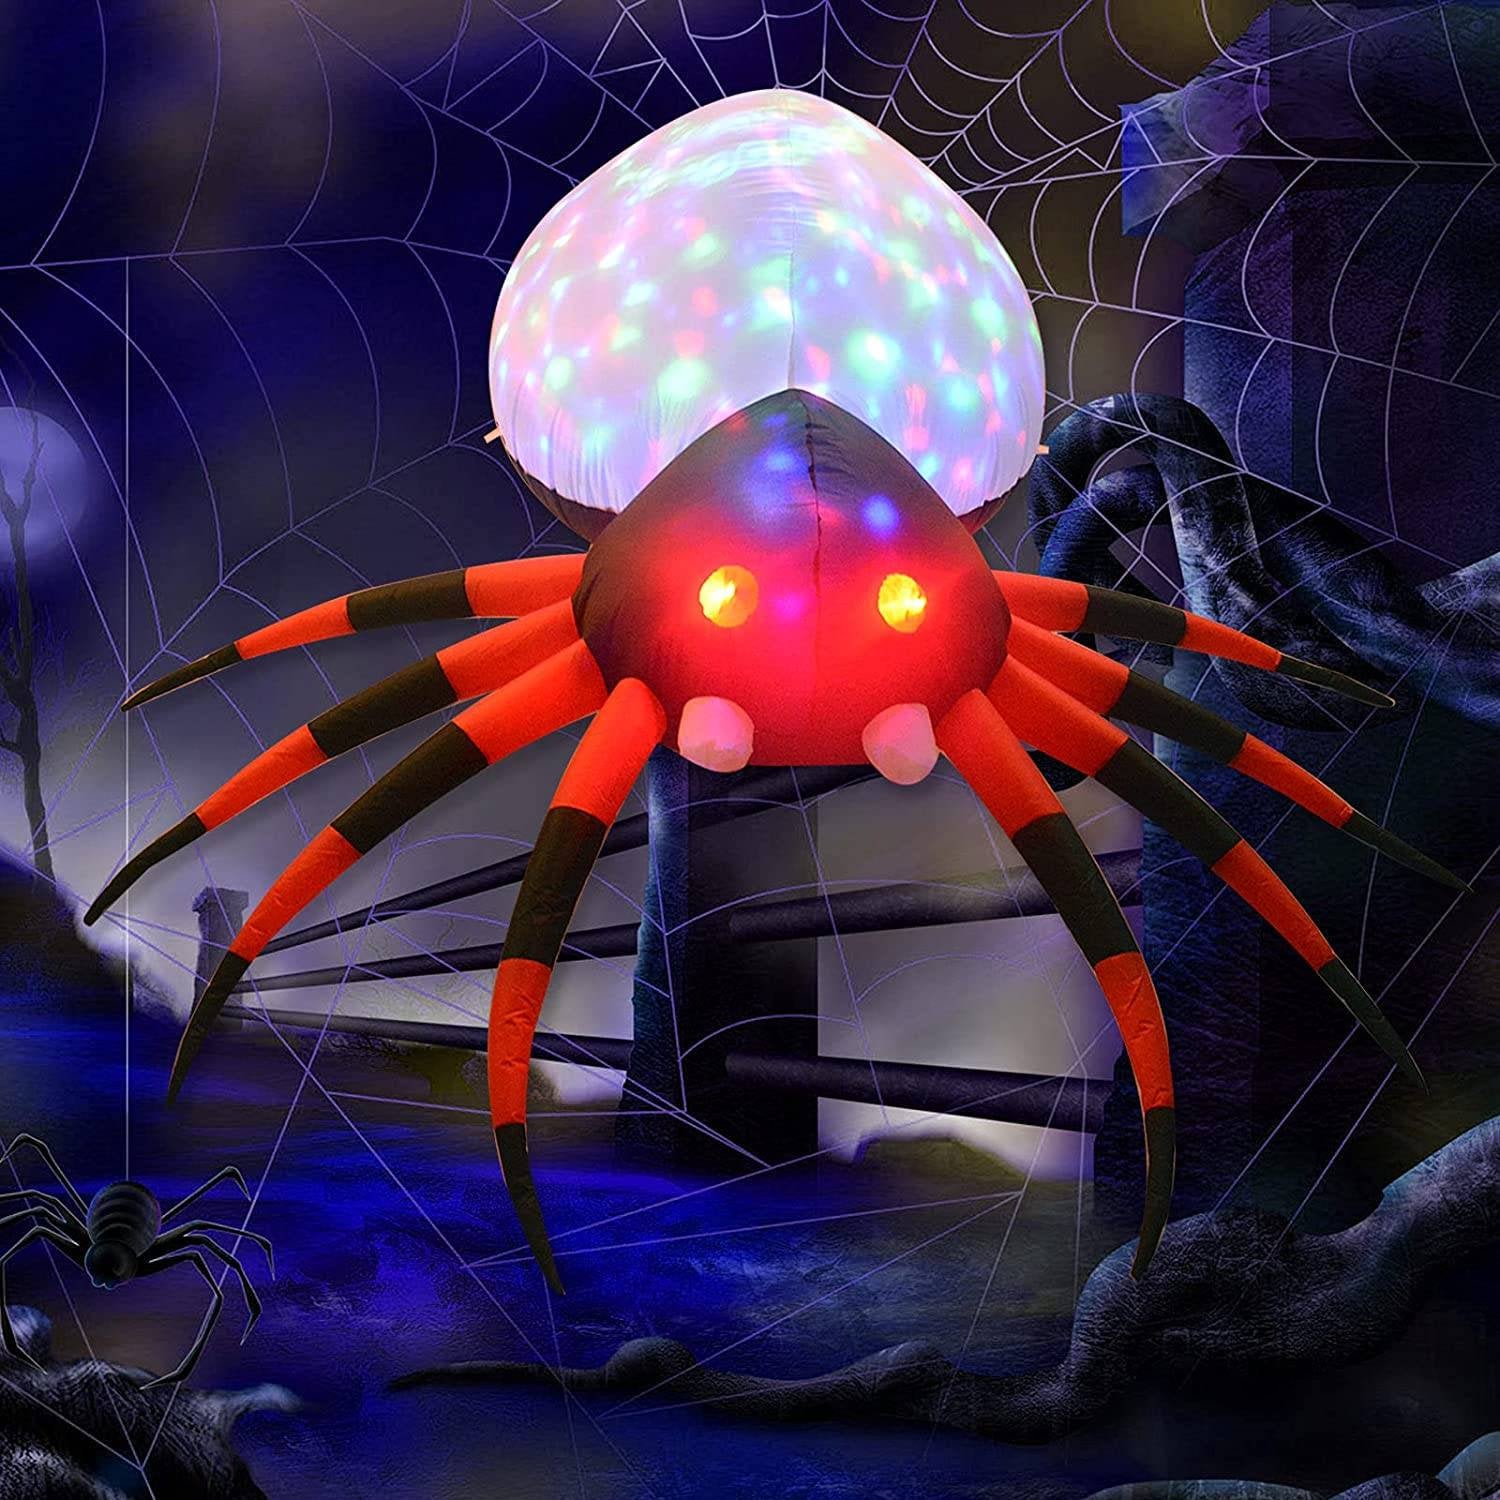 6 FT Width Halloween Inflatables Outdoor Spider with Magic Light, Blow Up Yard Decoration Clearance with LED Lights Built-in for Holiday/Party/Yard/Garden